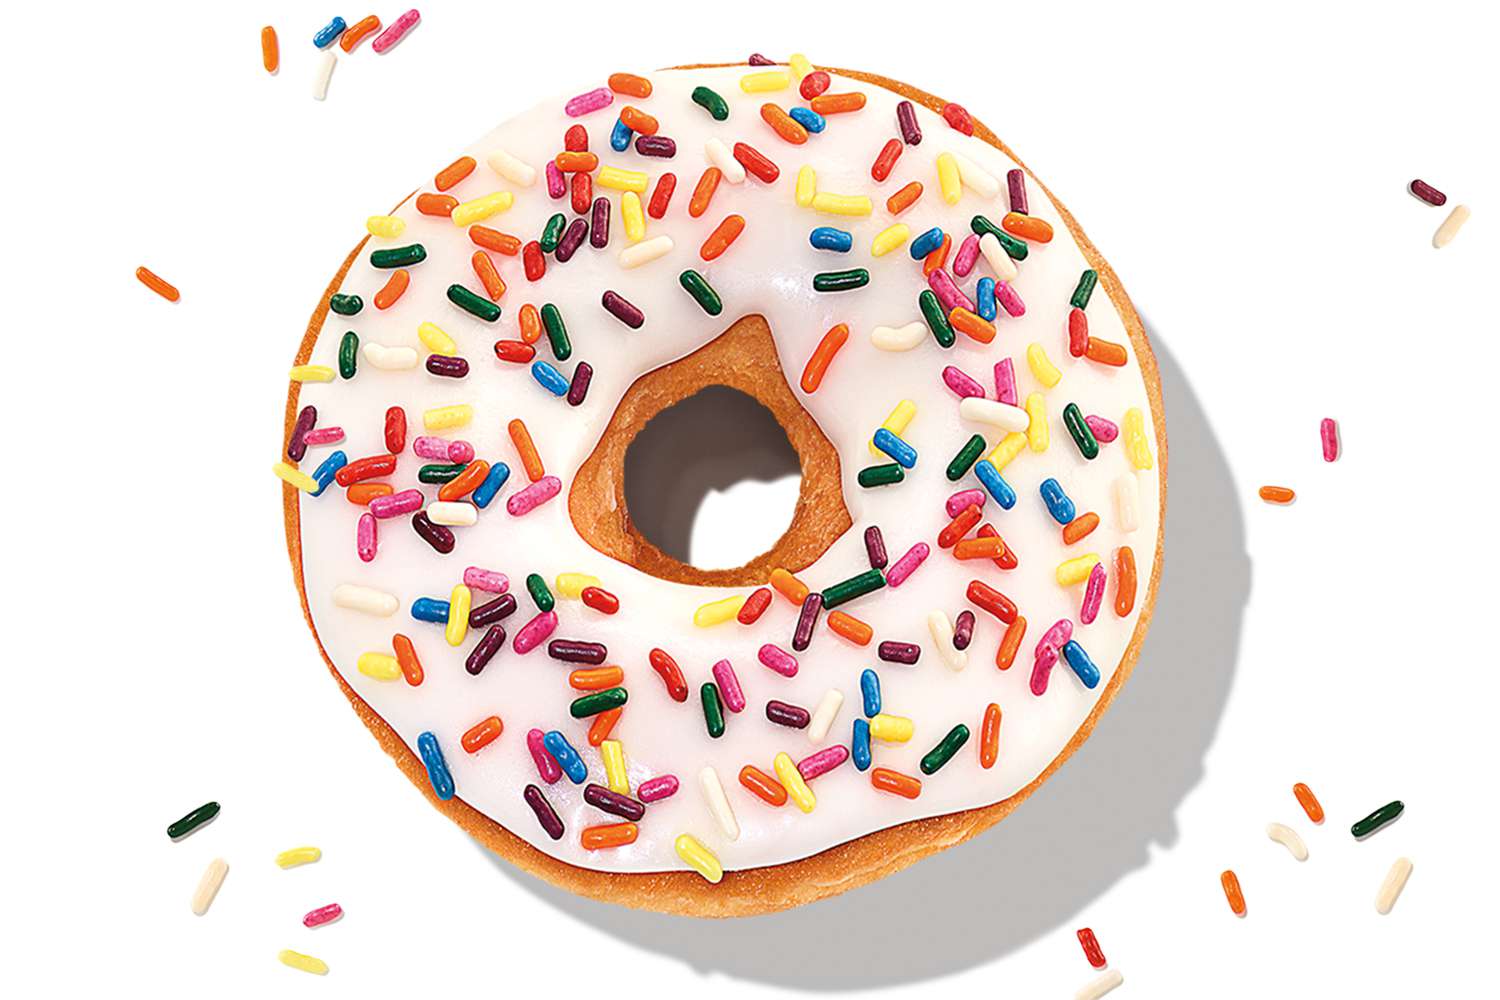 Dunkin’ Is Giving Out One Free Donut to Celebrate National Donut Day